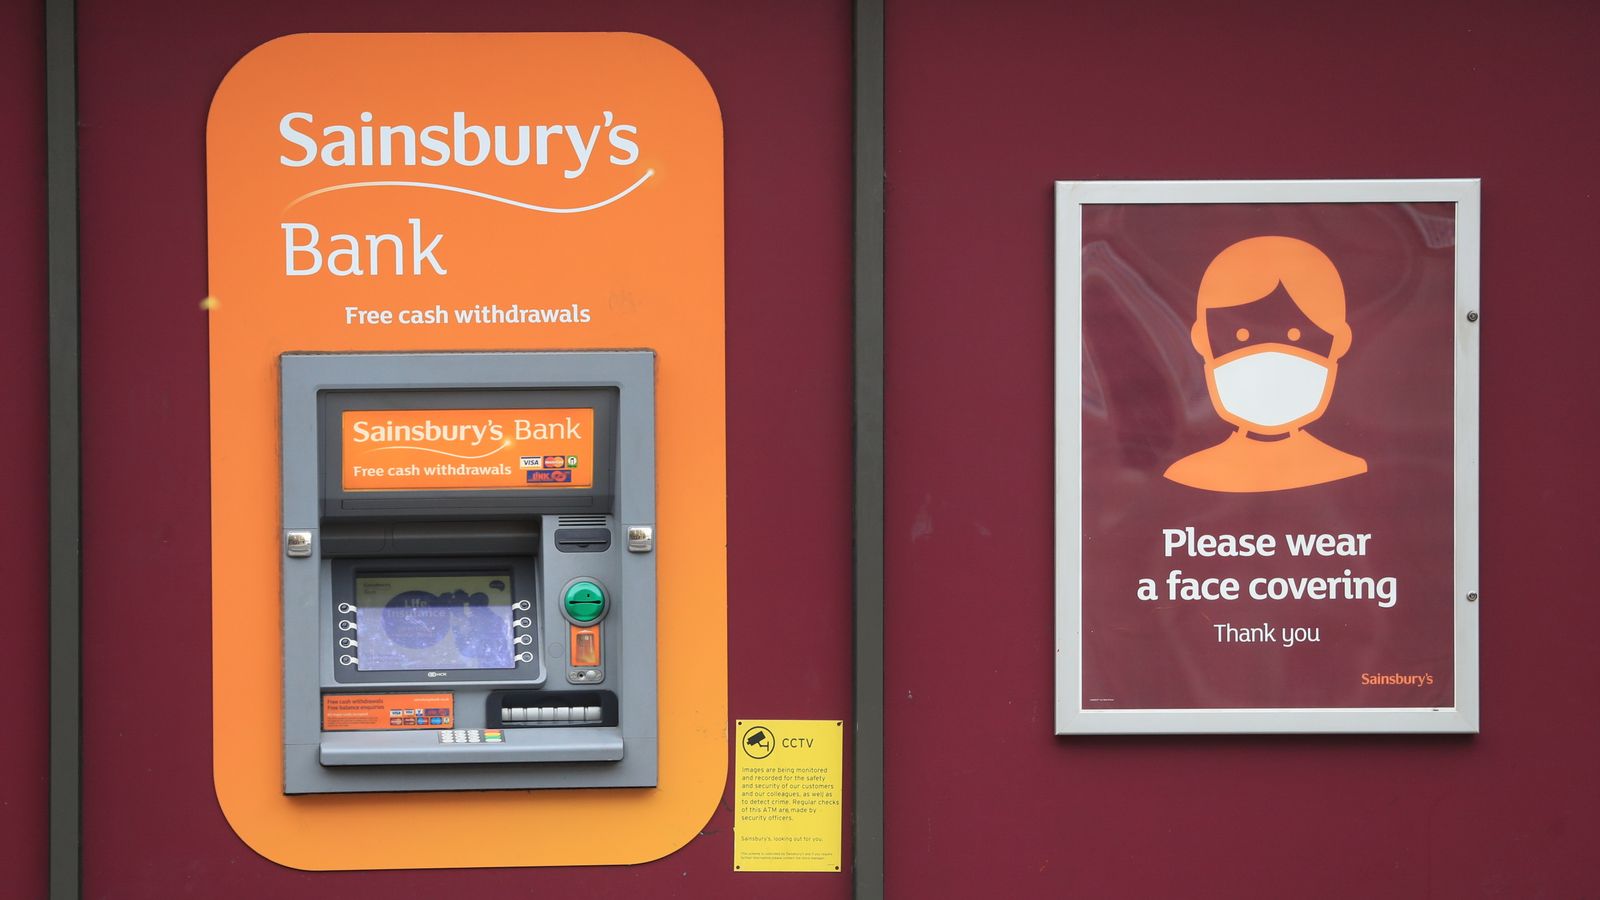 Co-operative Bank finds Sainsbury's un-cooperative over £650m mortgage deal